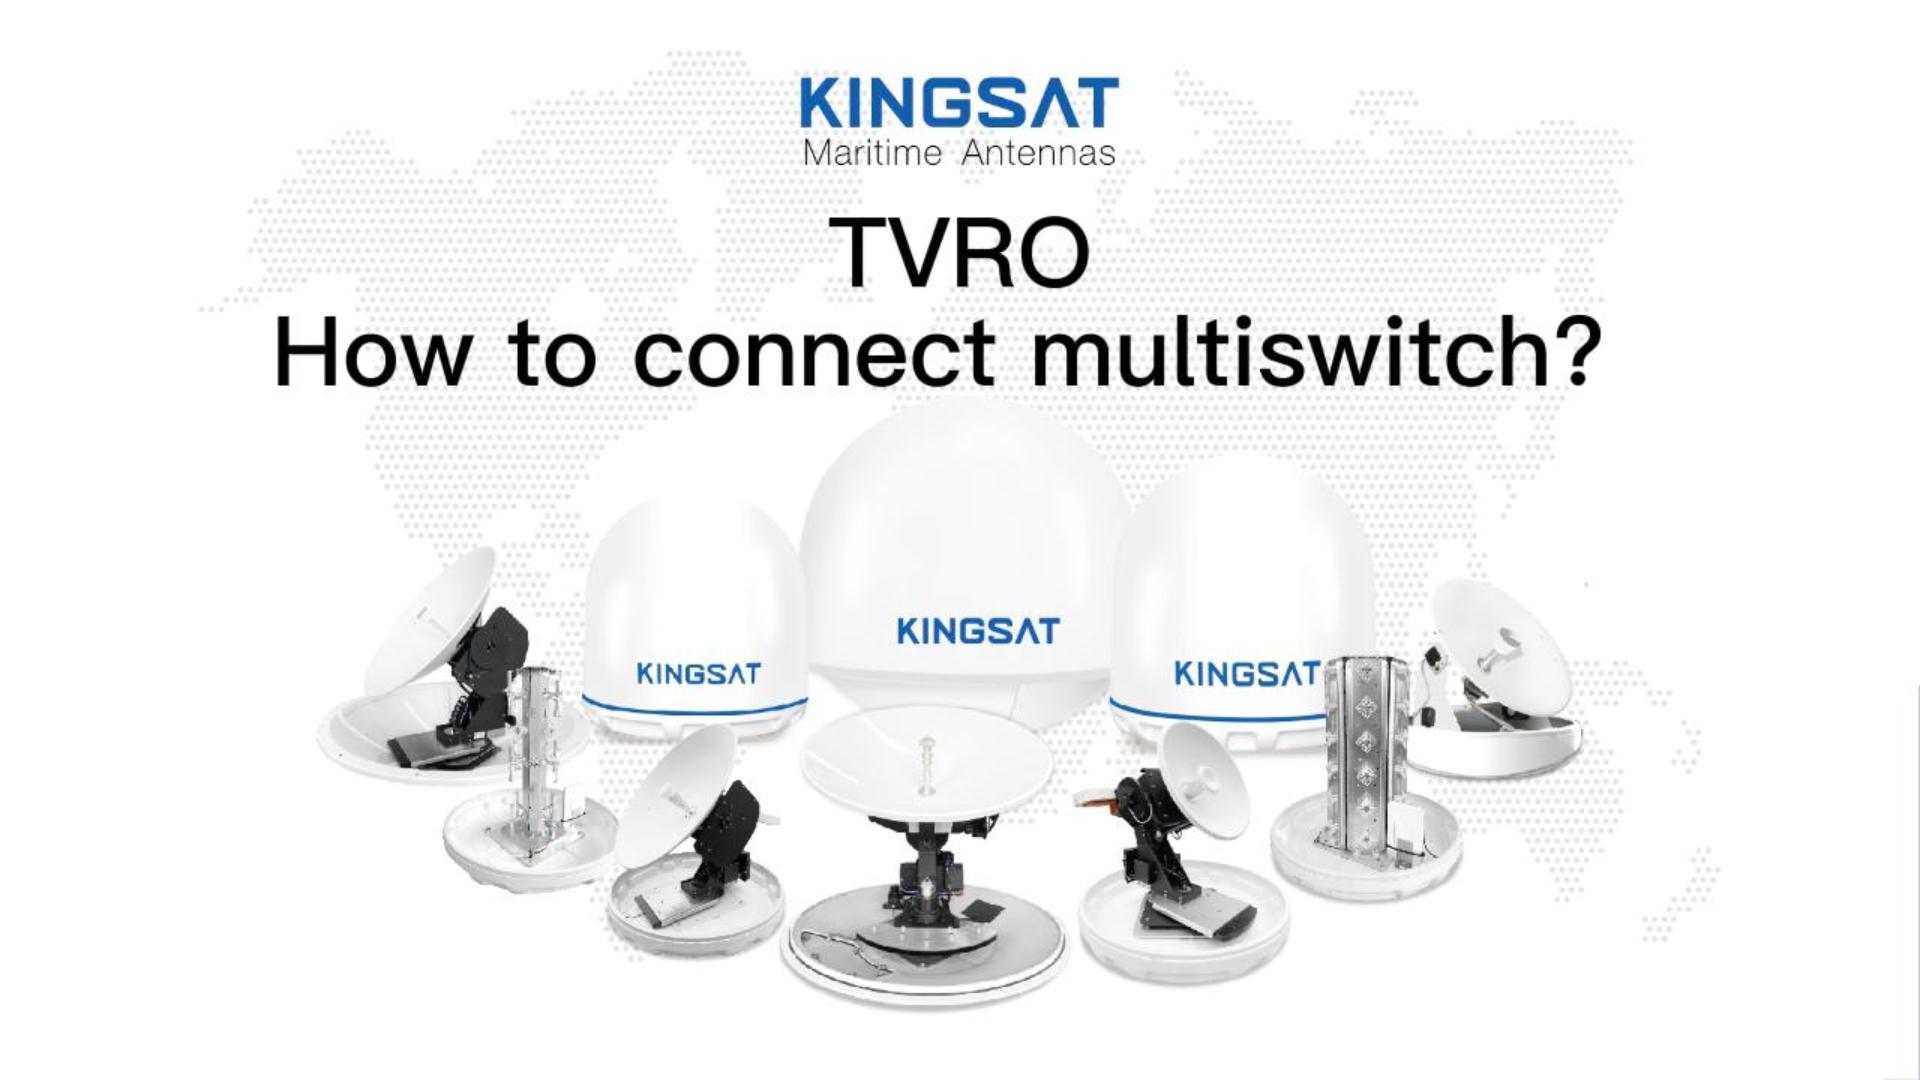 How to connect mutiswitch？